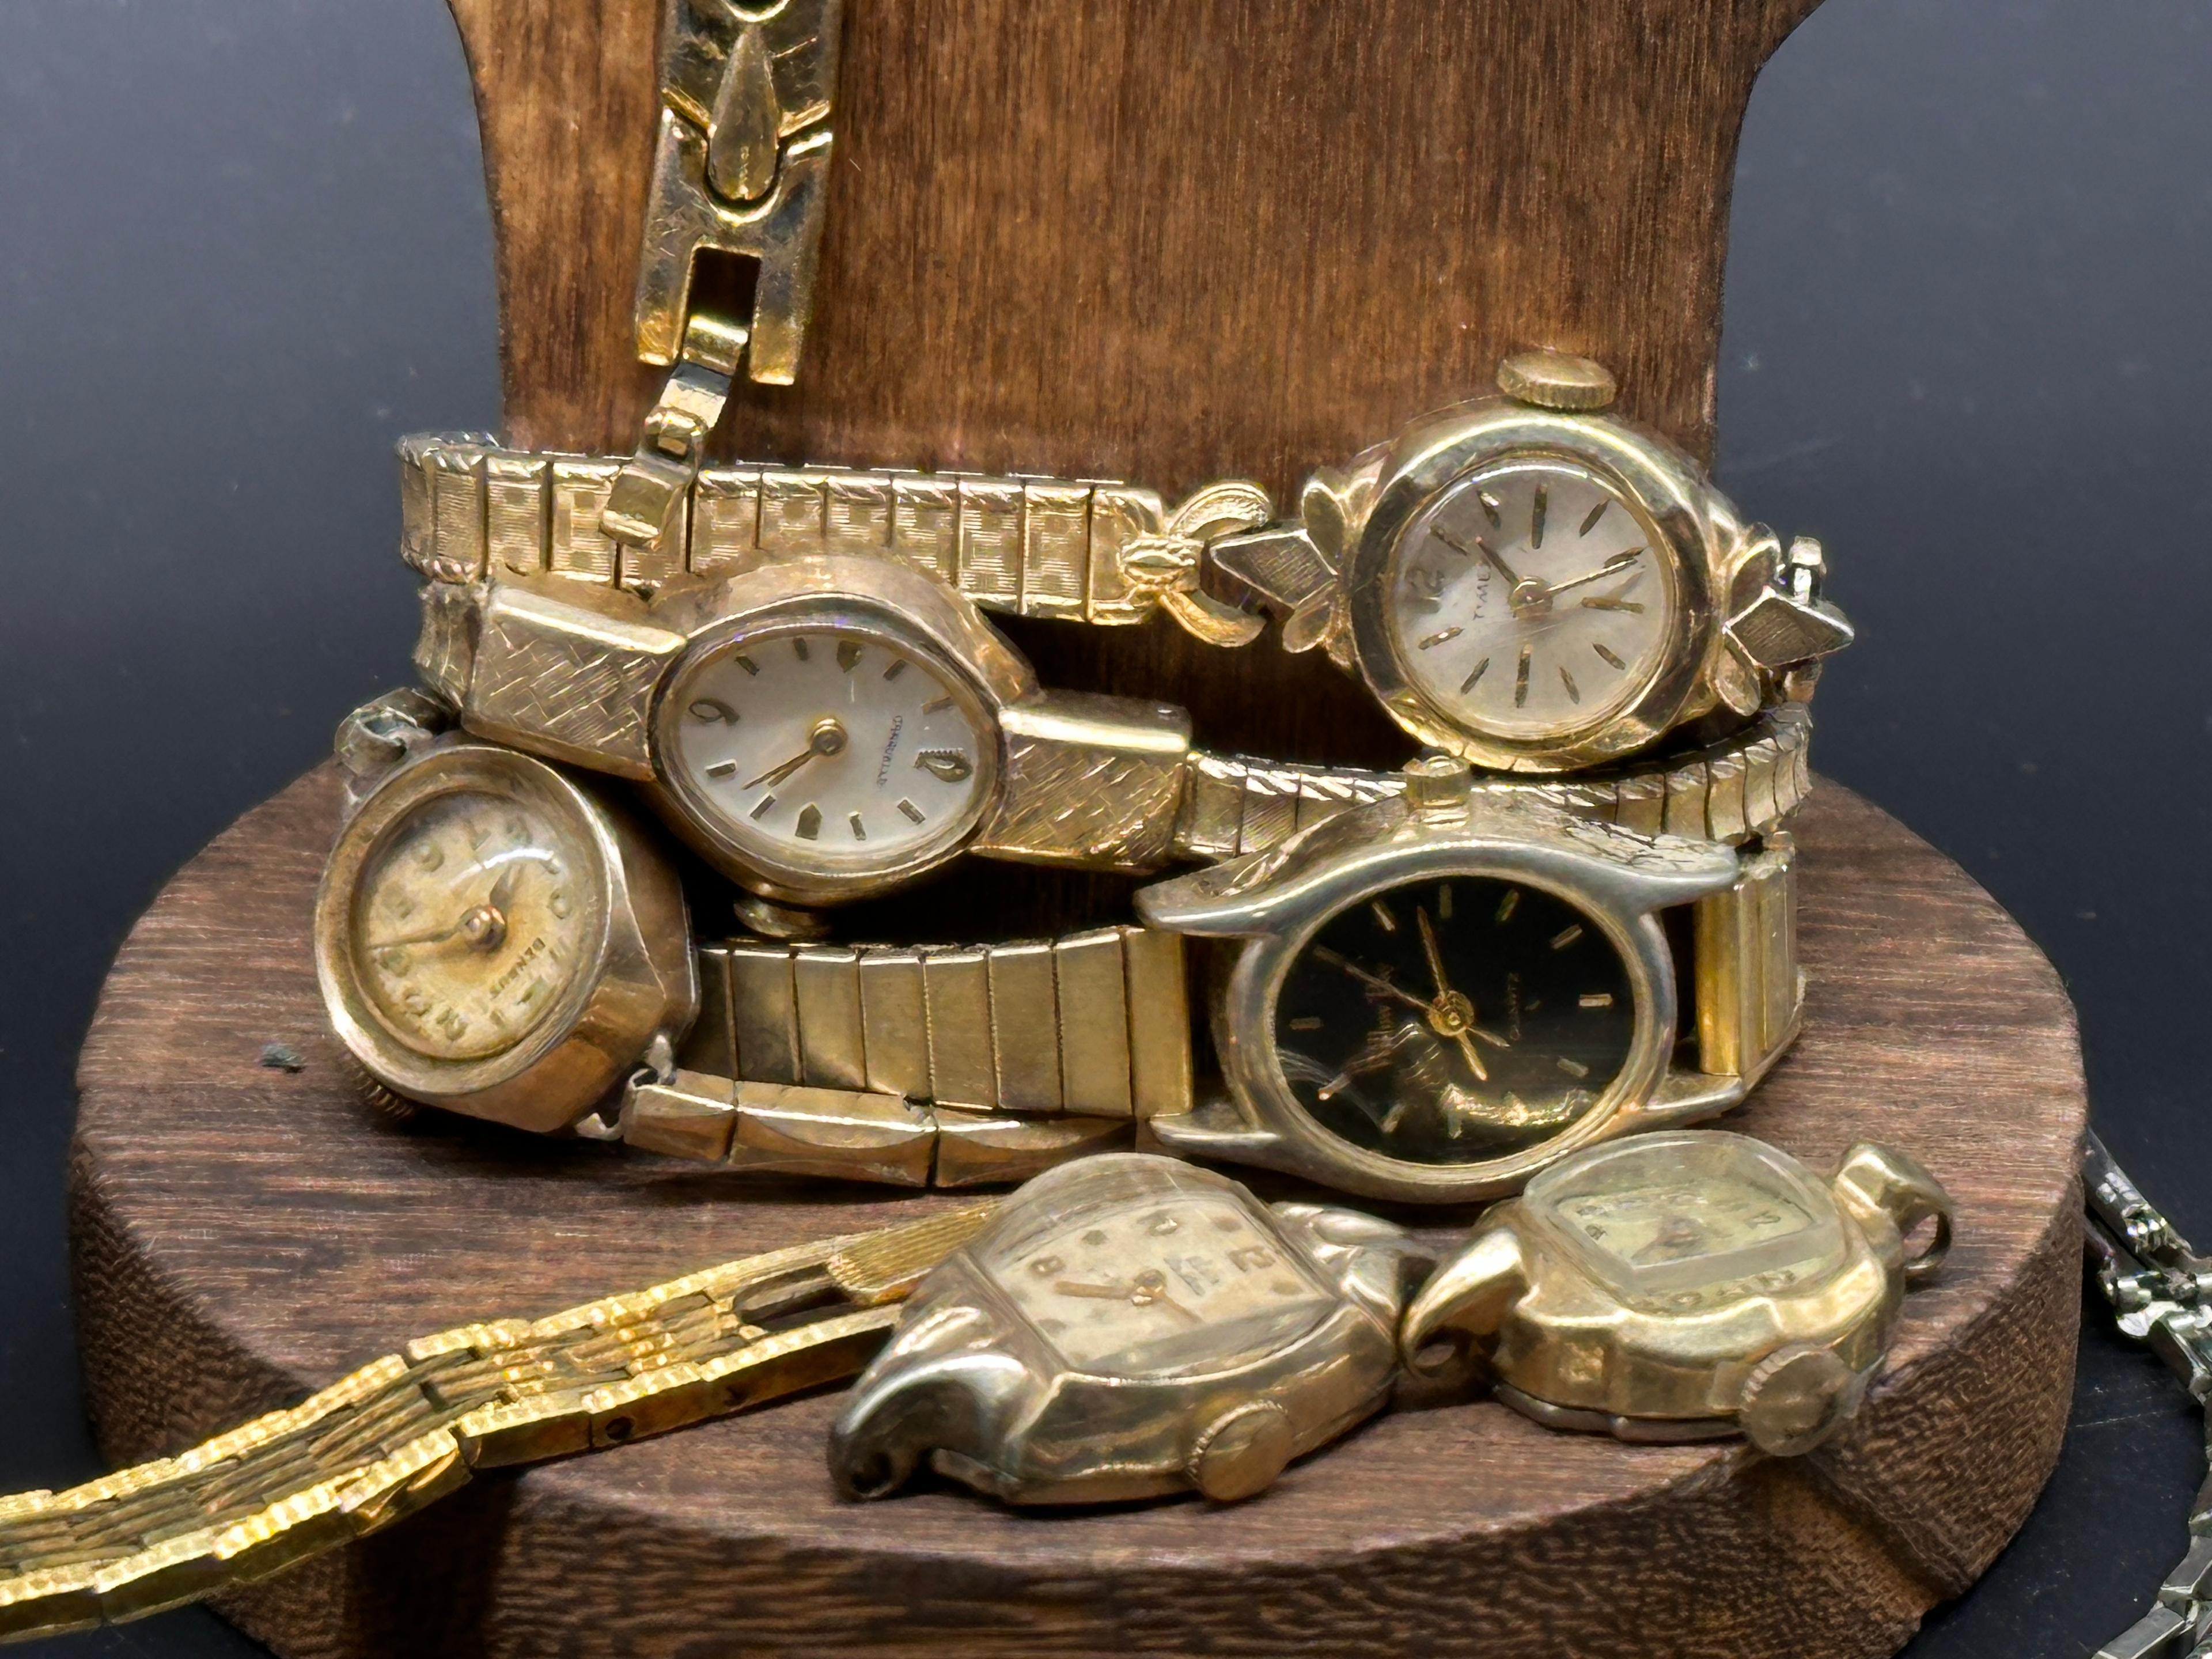 Assortment of Vintage/Antique Ladies Wrist Watches and Watch Parts